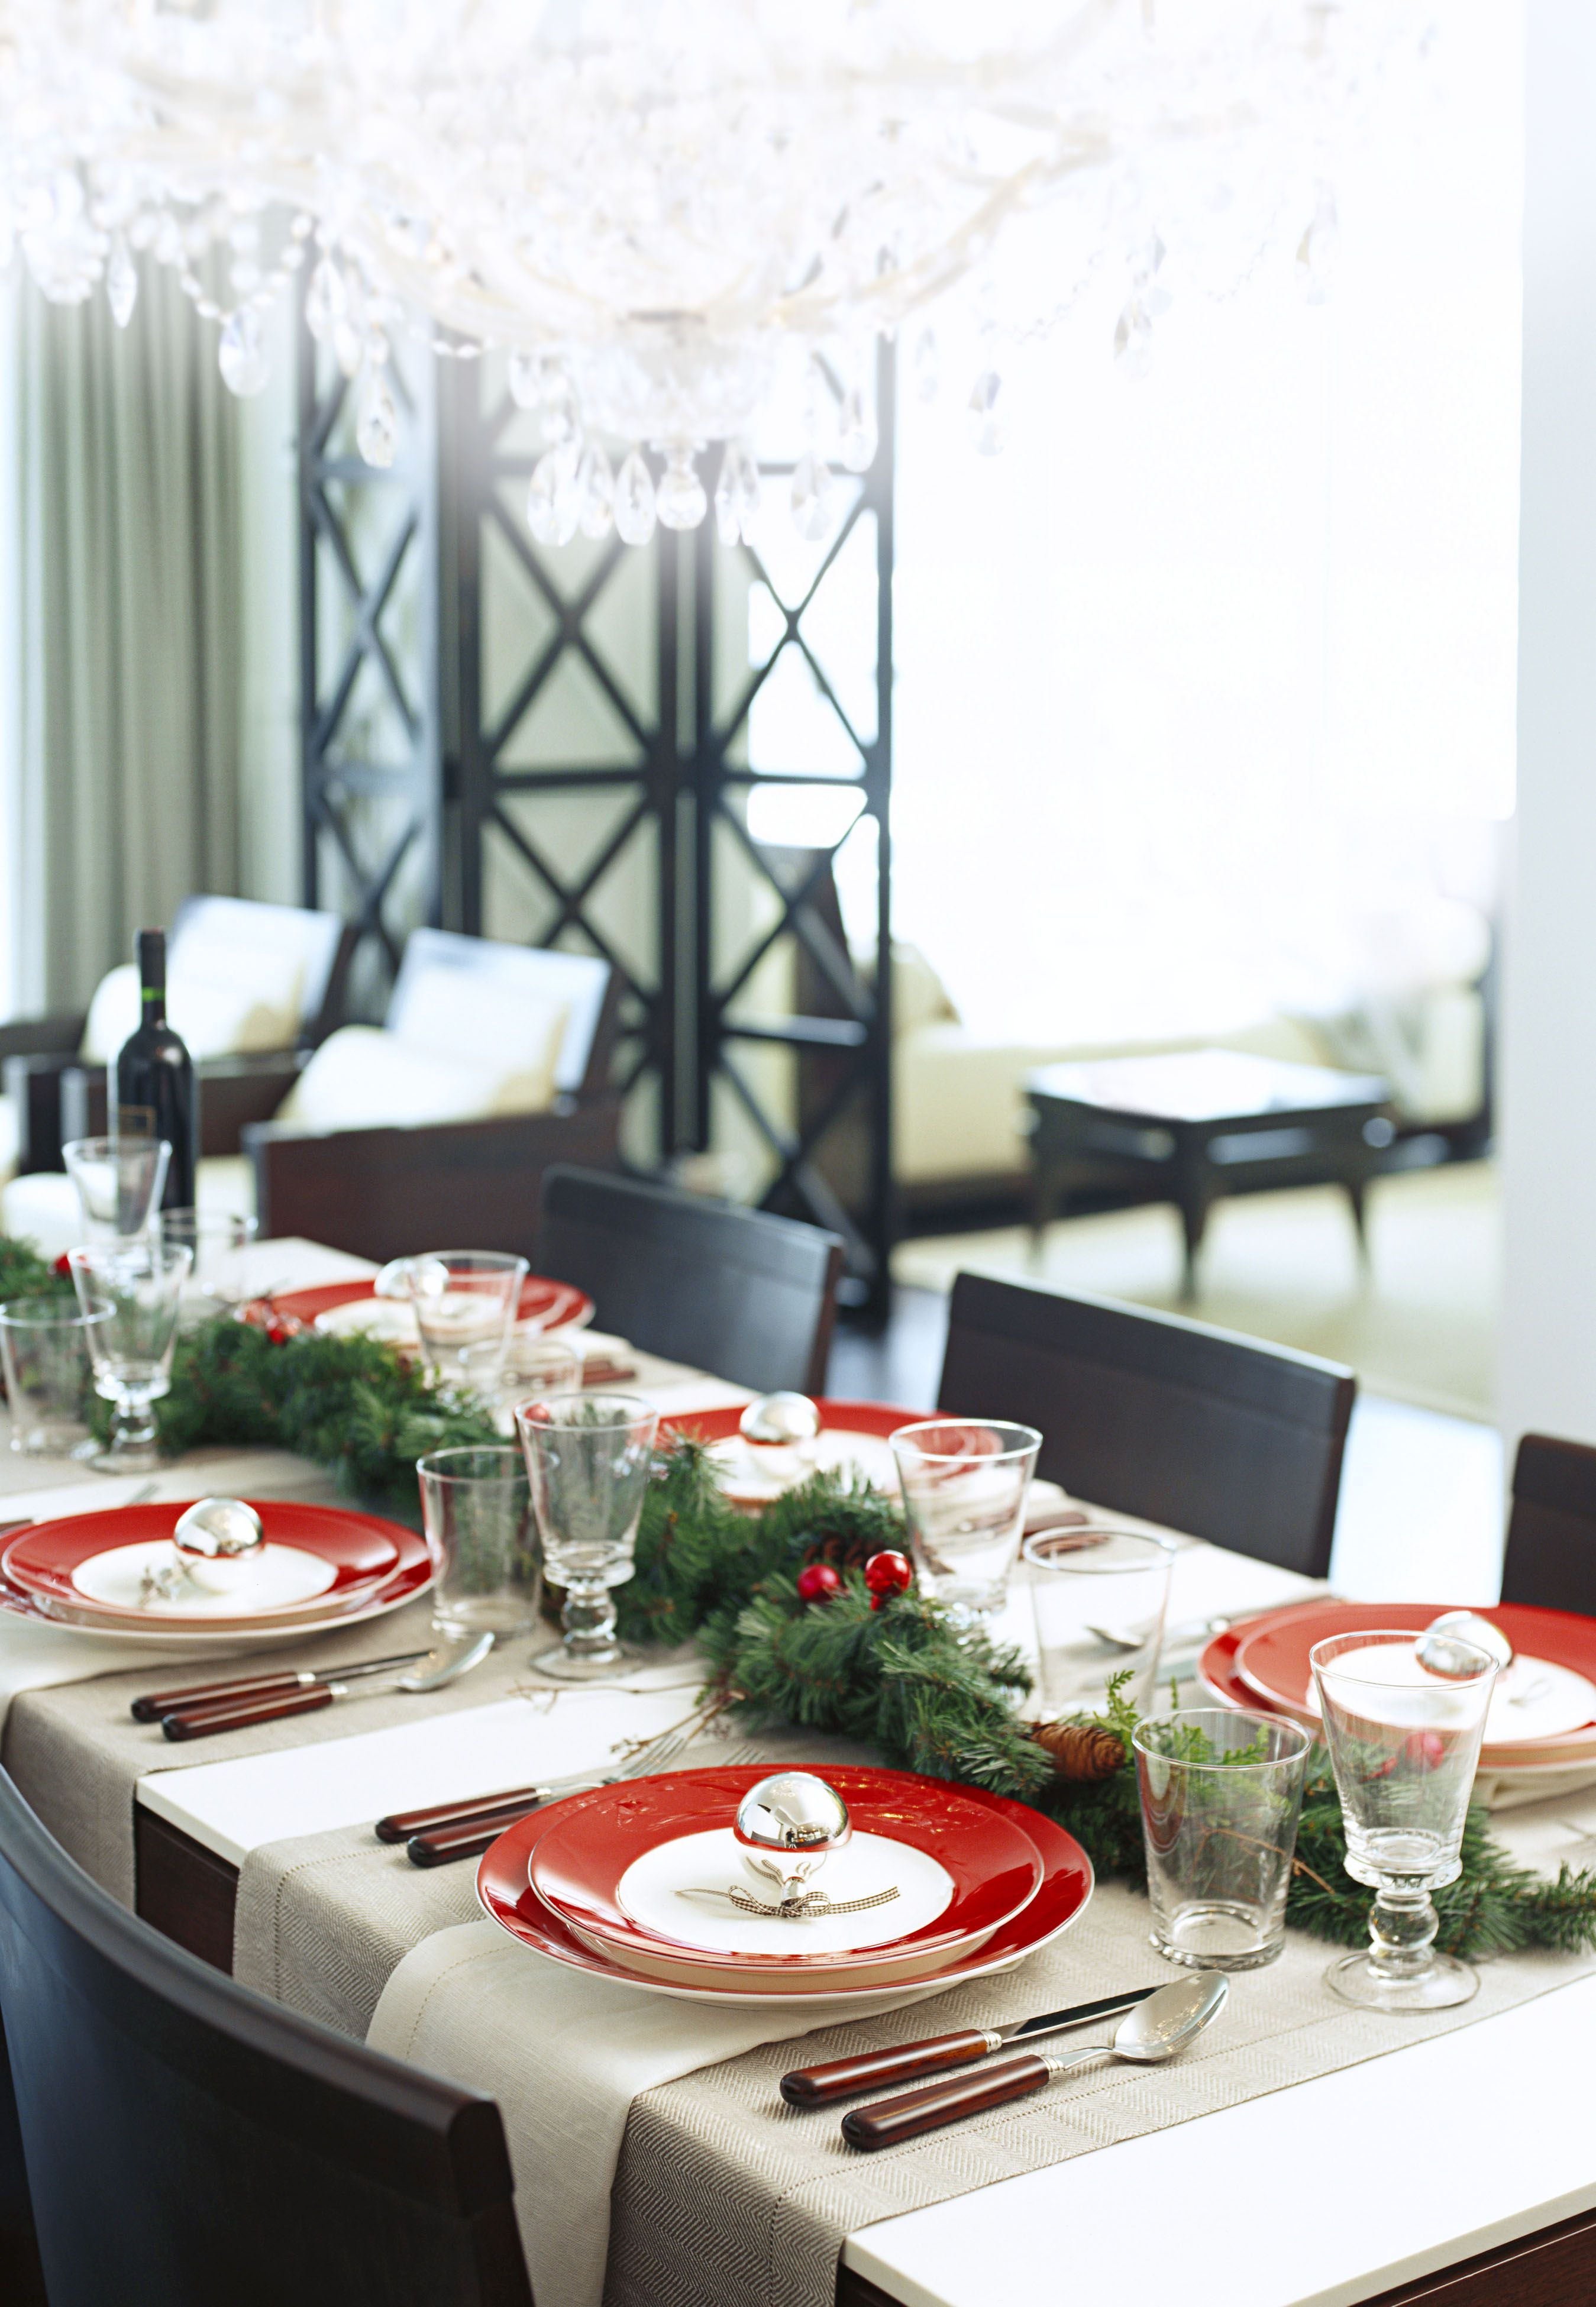 18 DIY Christmas Table Settings and Decorations   Centerpieces ...